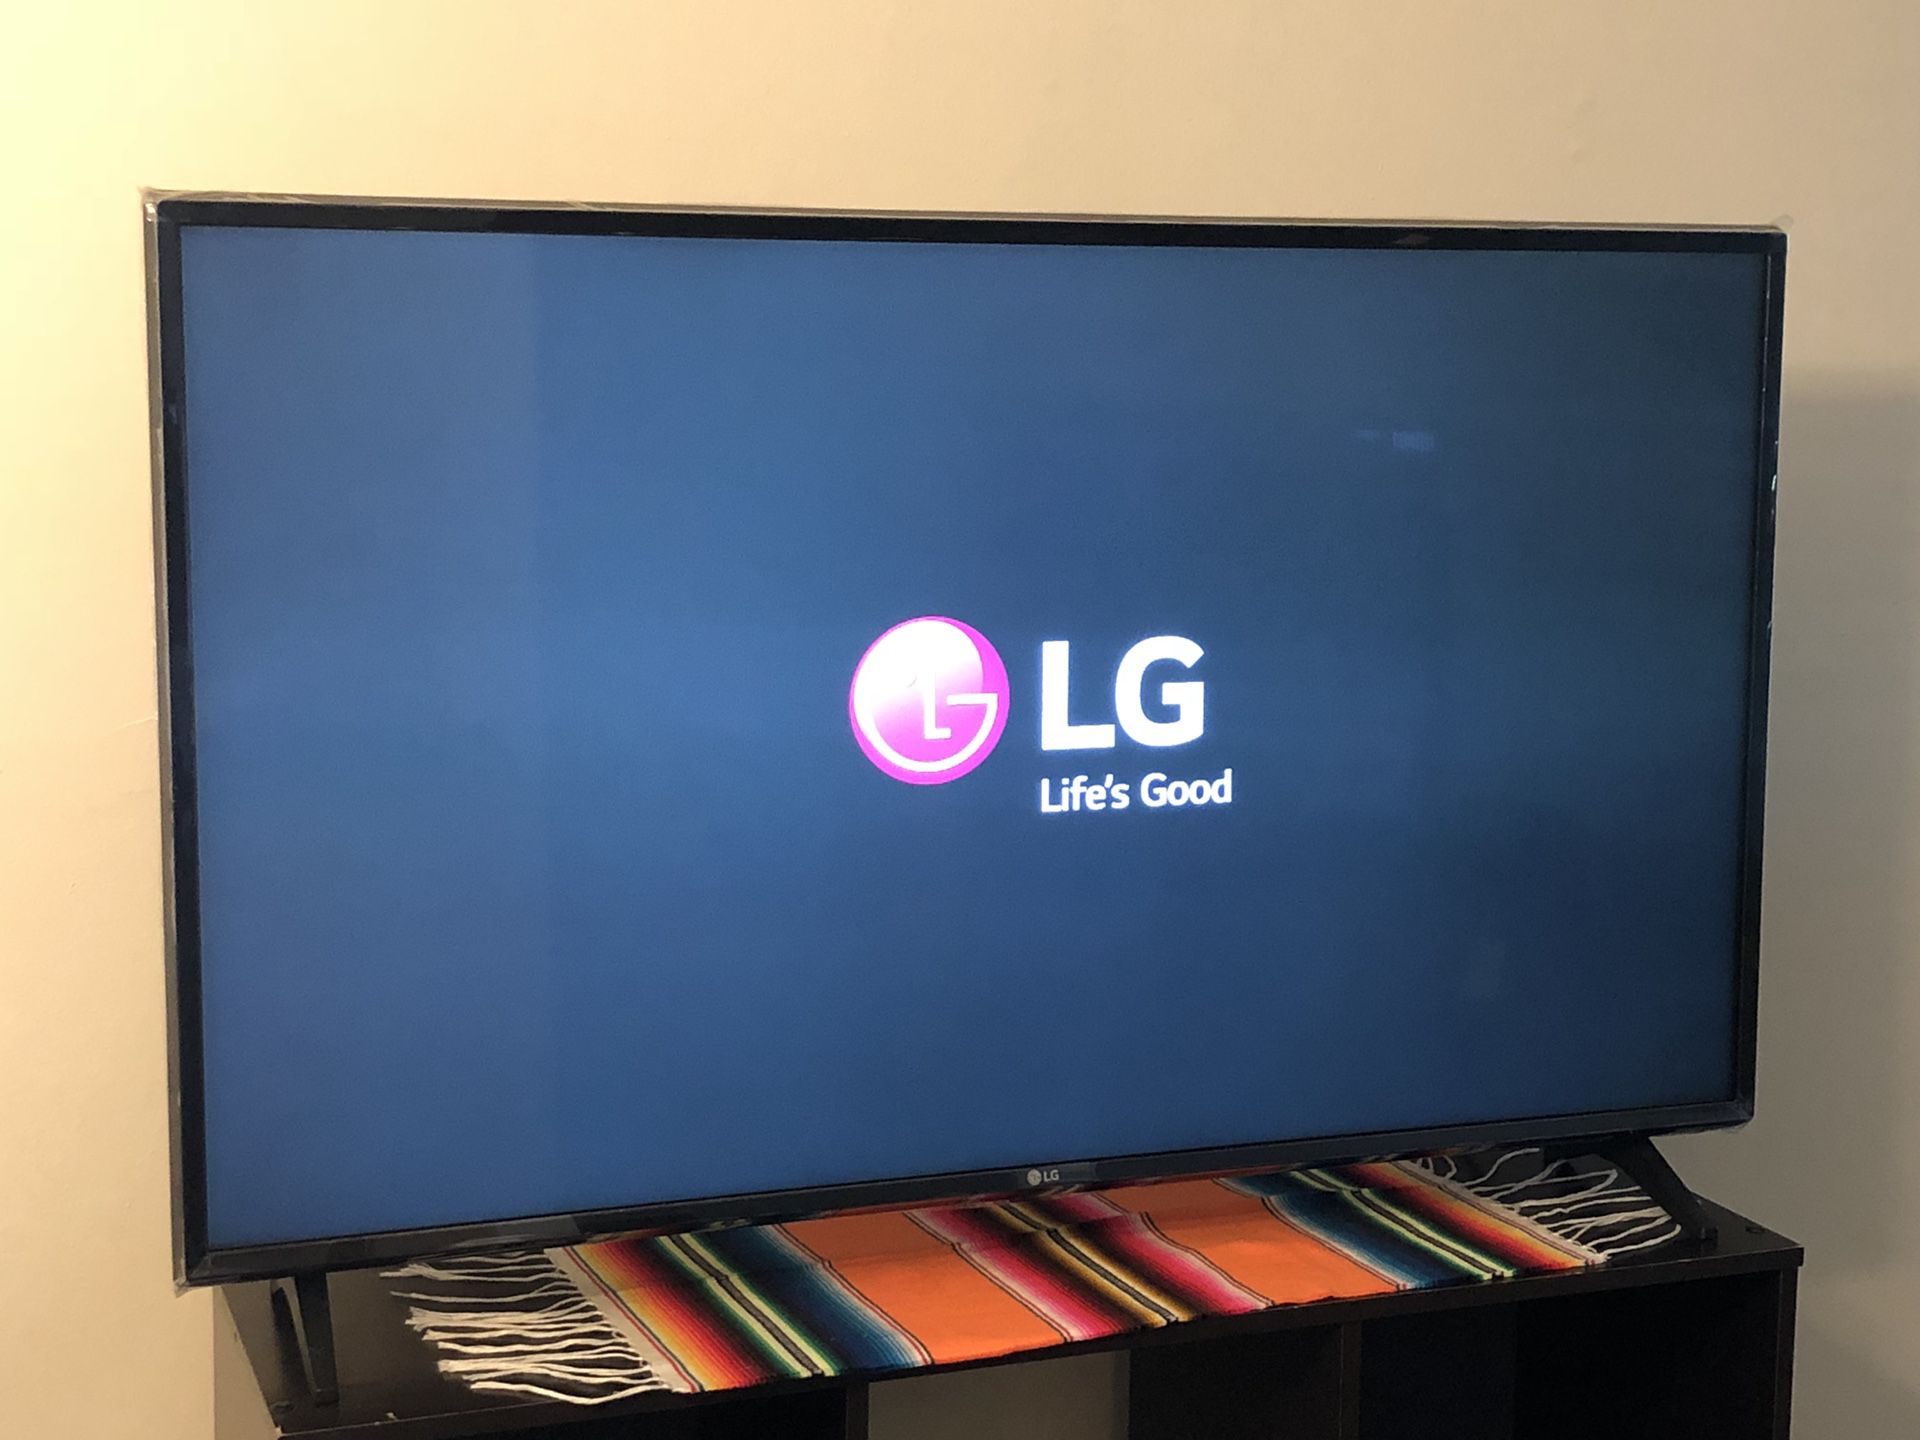 $170,LG smart tv, 45 inches, works great, comes with remote.